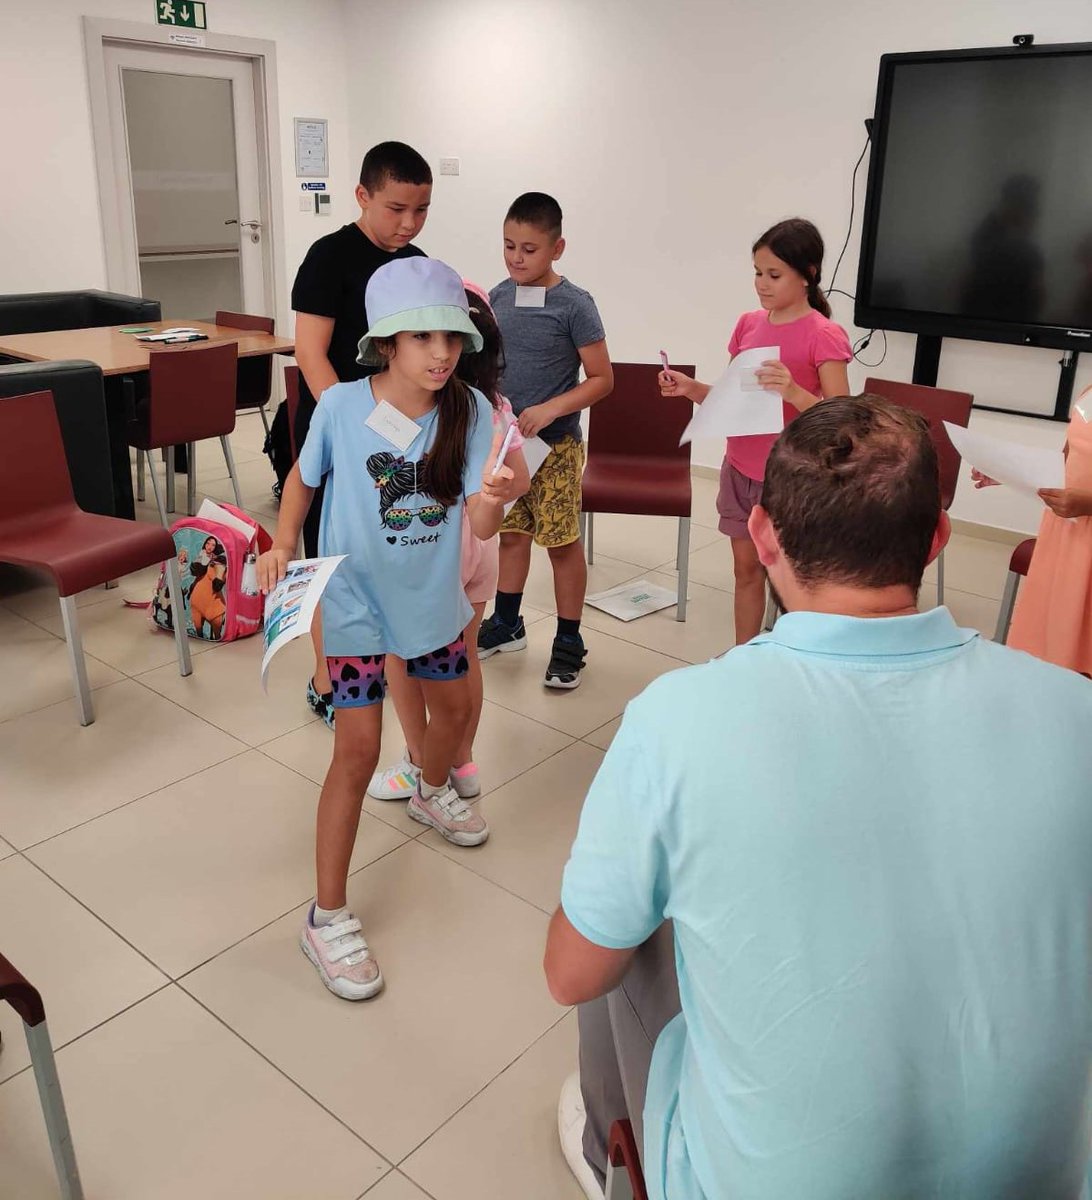 Session 2 of the Super Sibs programme was held yesterday, this time discussing hopes and fears. 

Thanks to Ronald McDonald House Charities Malta for hosting us! 

#sapport2023 #20senataservizz #supersibs #summerprogramme #interactivesessions #children #siblingwithdisability #fun